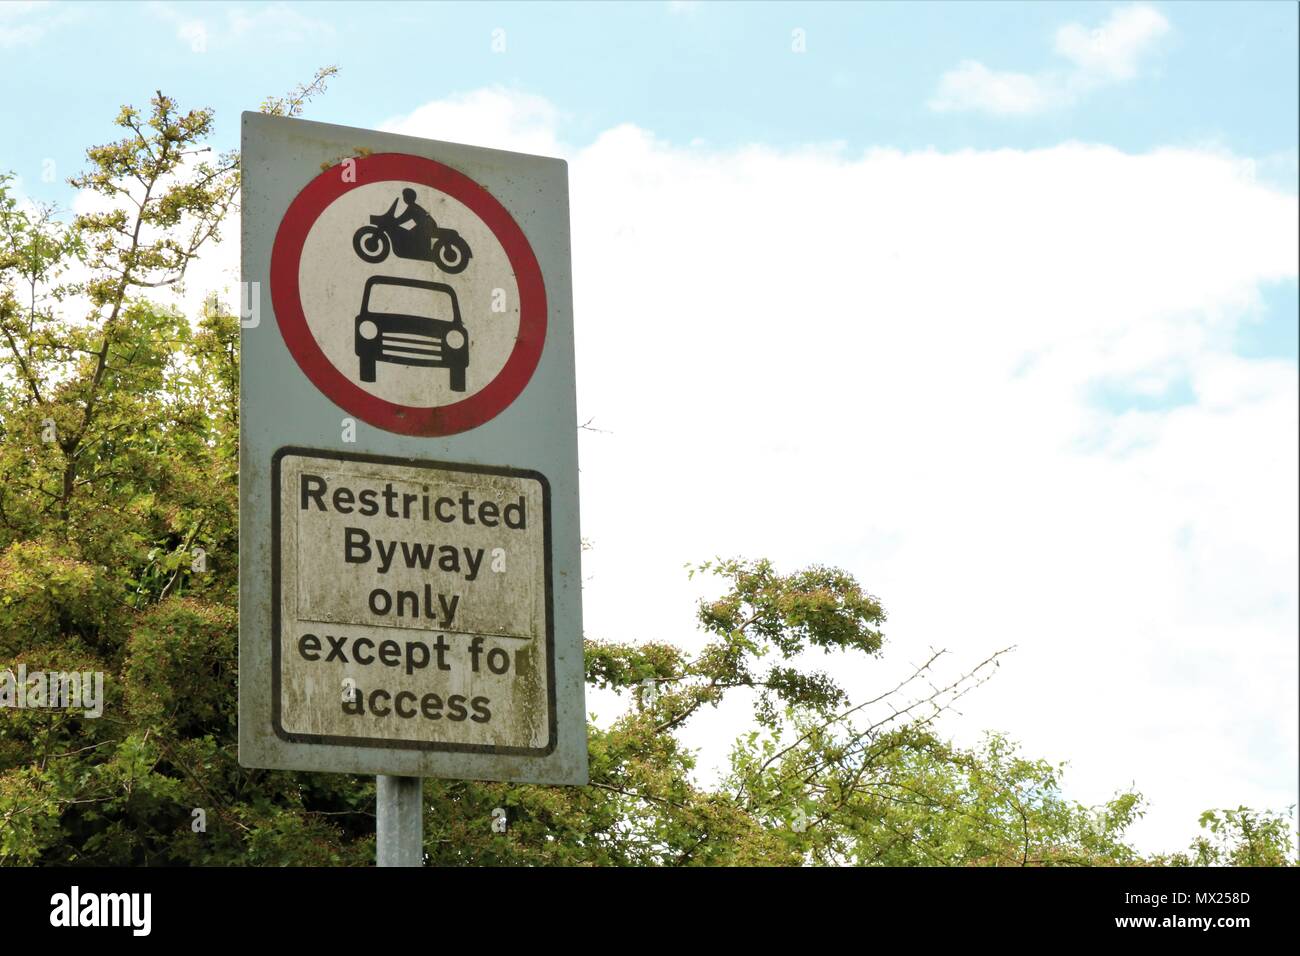 'Restricted Byway only except for access' dirty sign Stock Photo